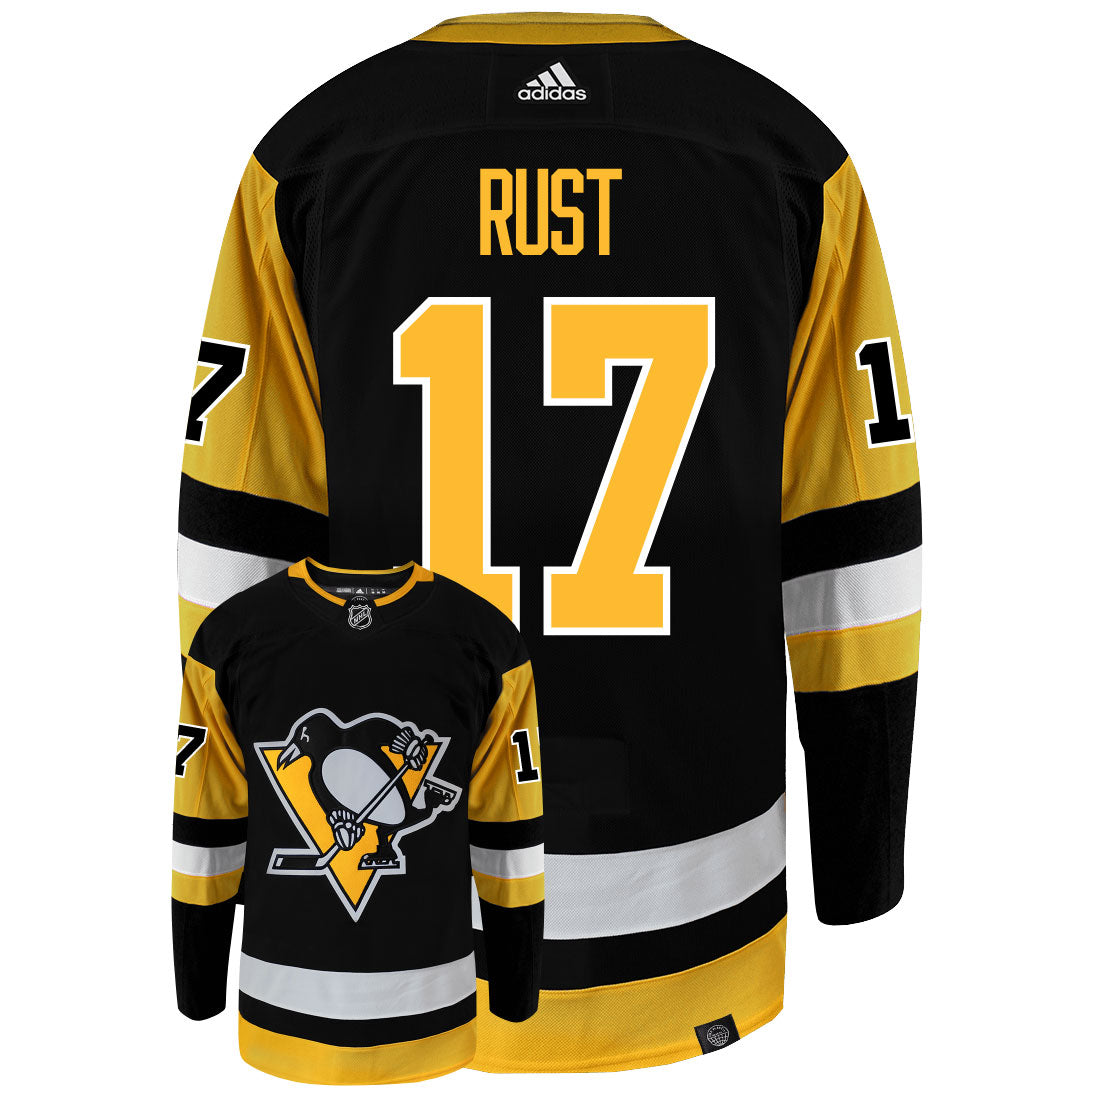 Bryan Rust Pittsburgh Penguins Adidas Primegreen Authentic NHL Hockey Jersey - Back/Front View